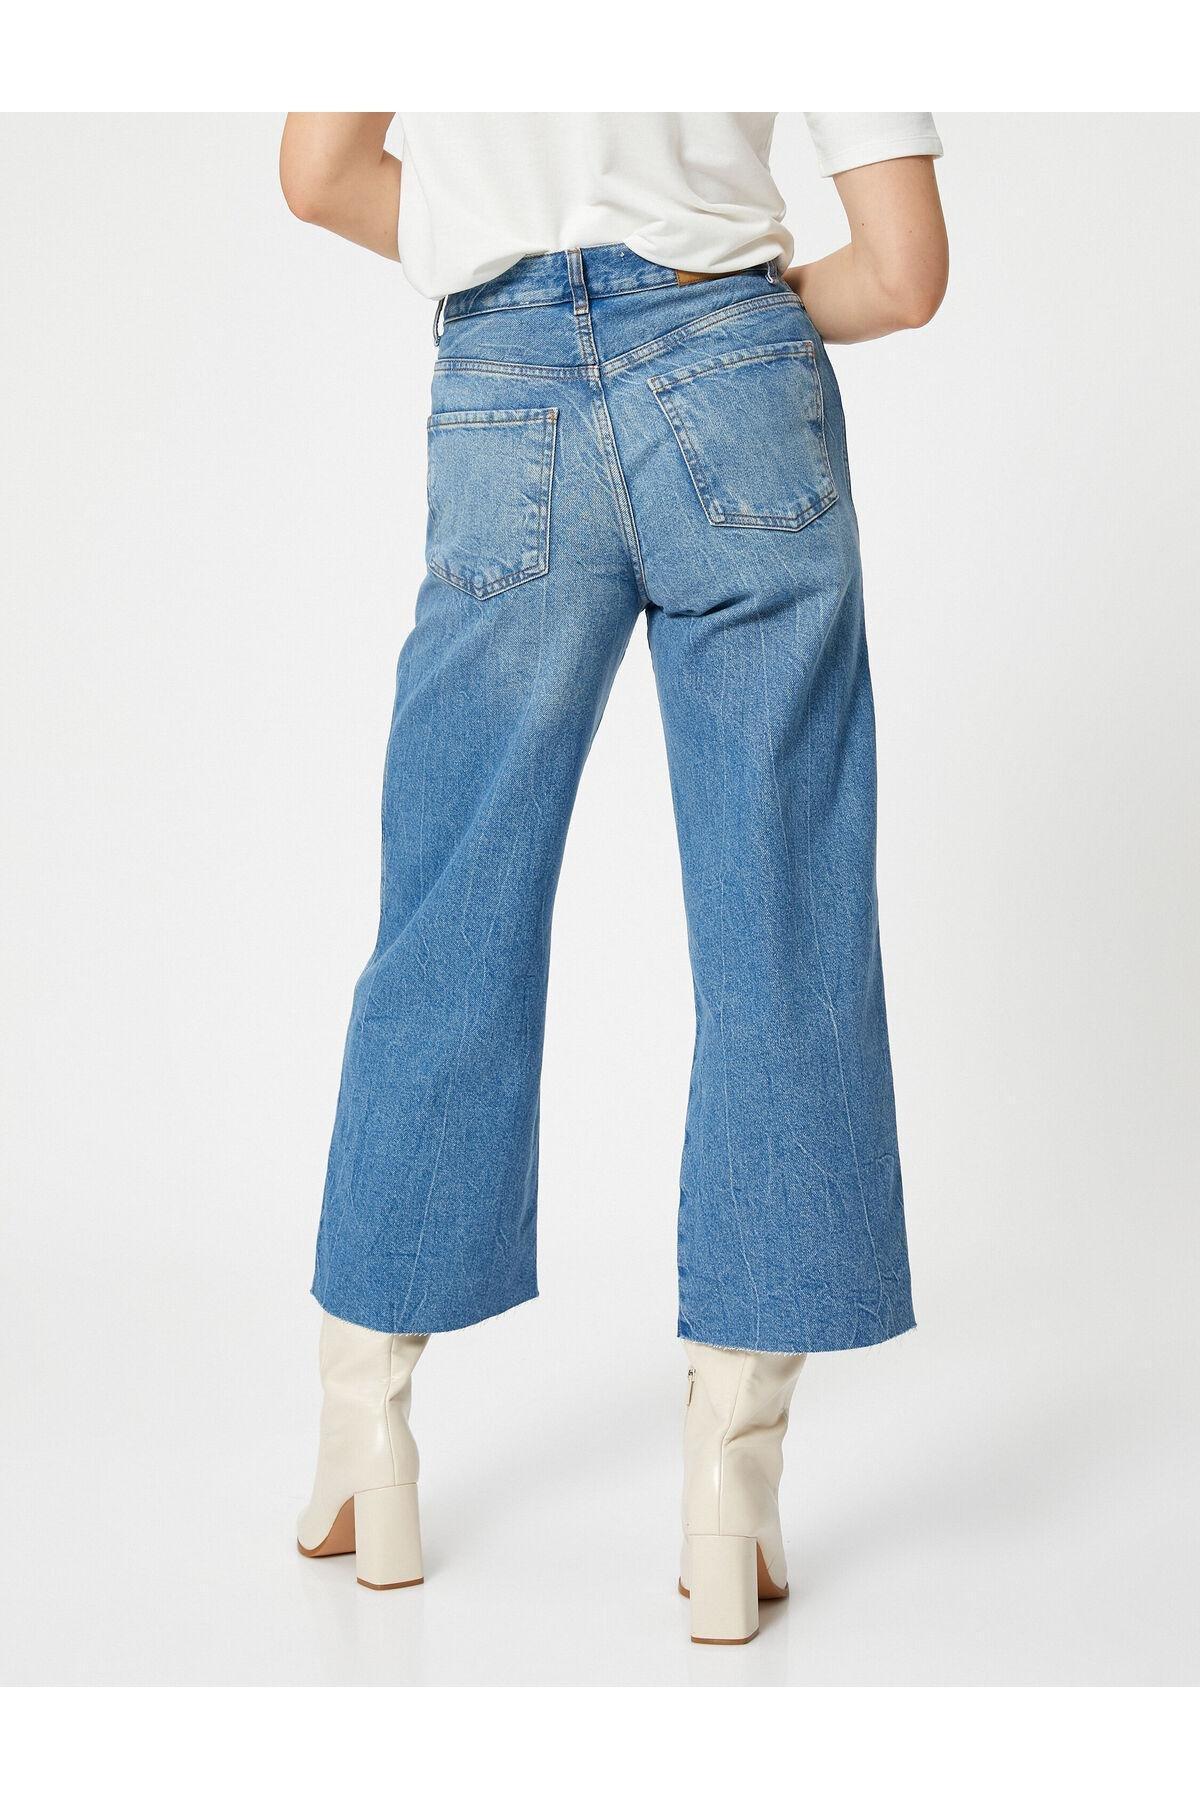 Koton - Blue Extra Wide Crop Jeans